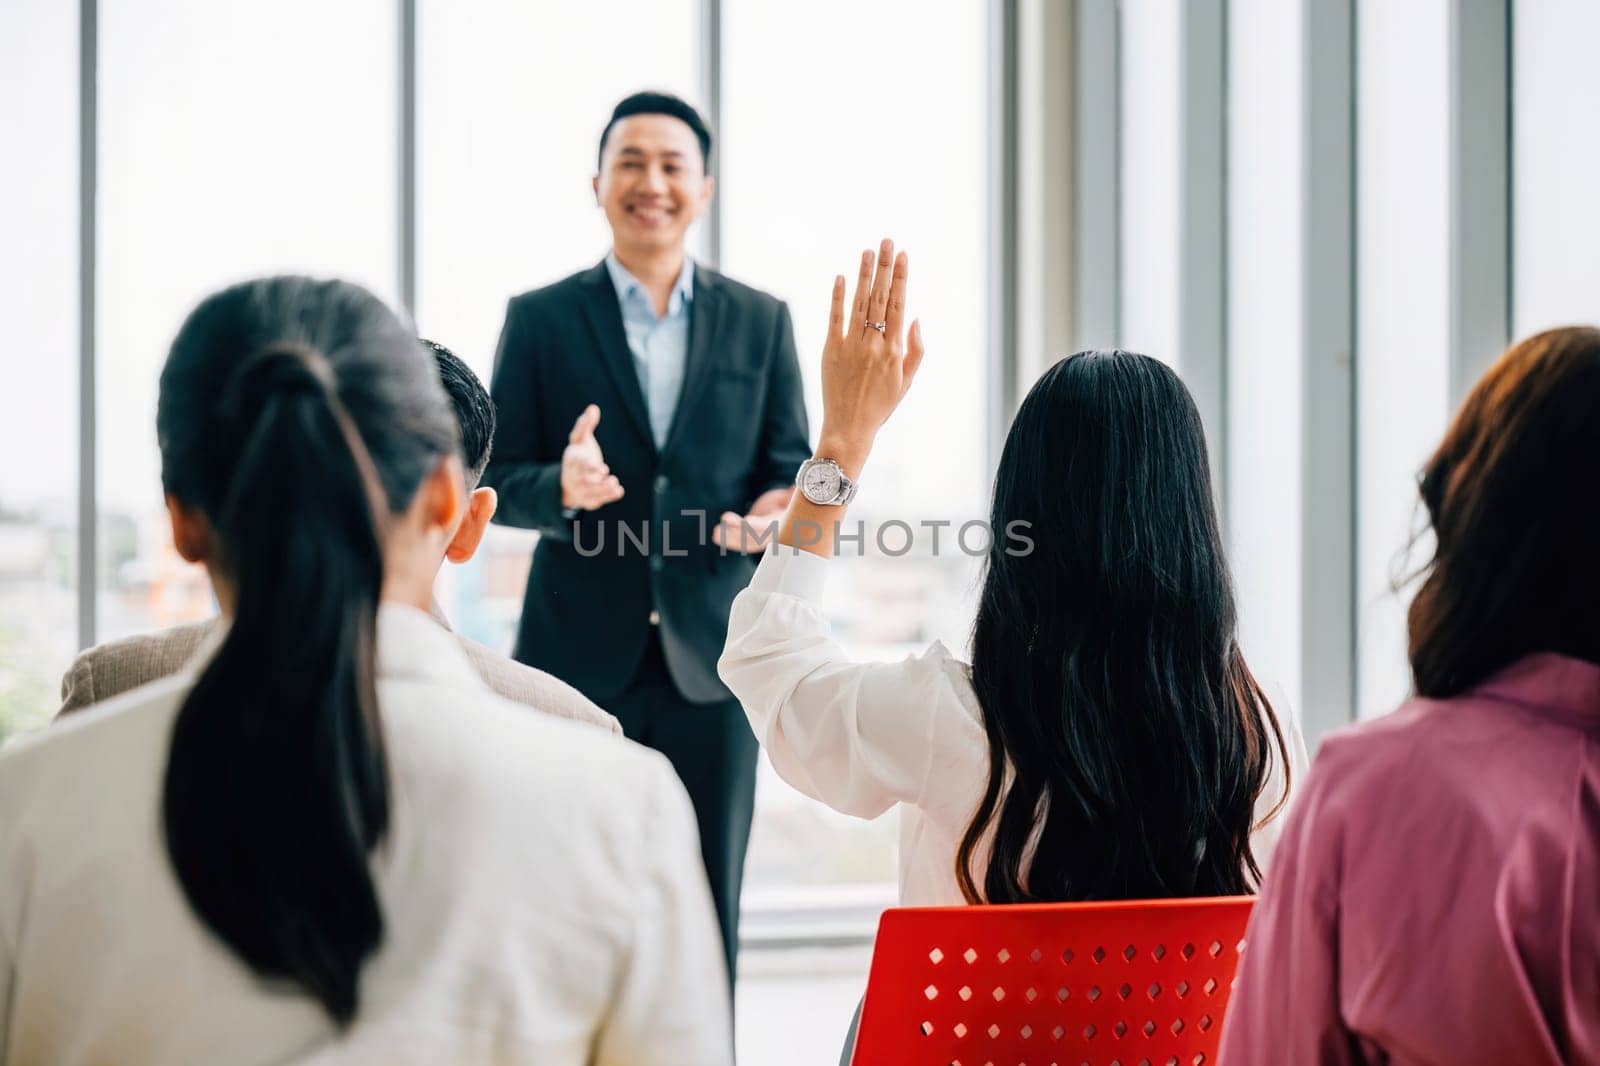 In a conference, business professionals raise their hands to ask questions, vote, or volunteer, highlighting teamwork and active audience involvement in a corporate setting.